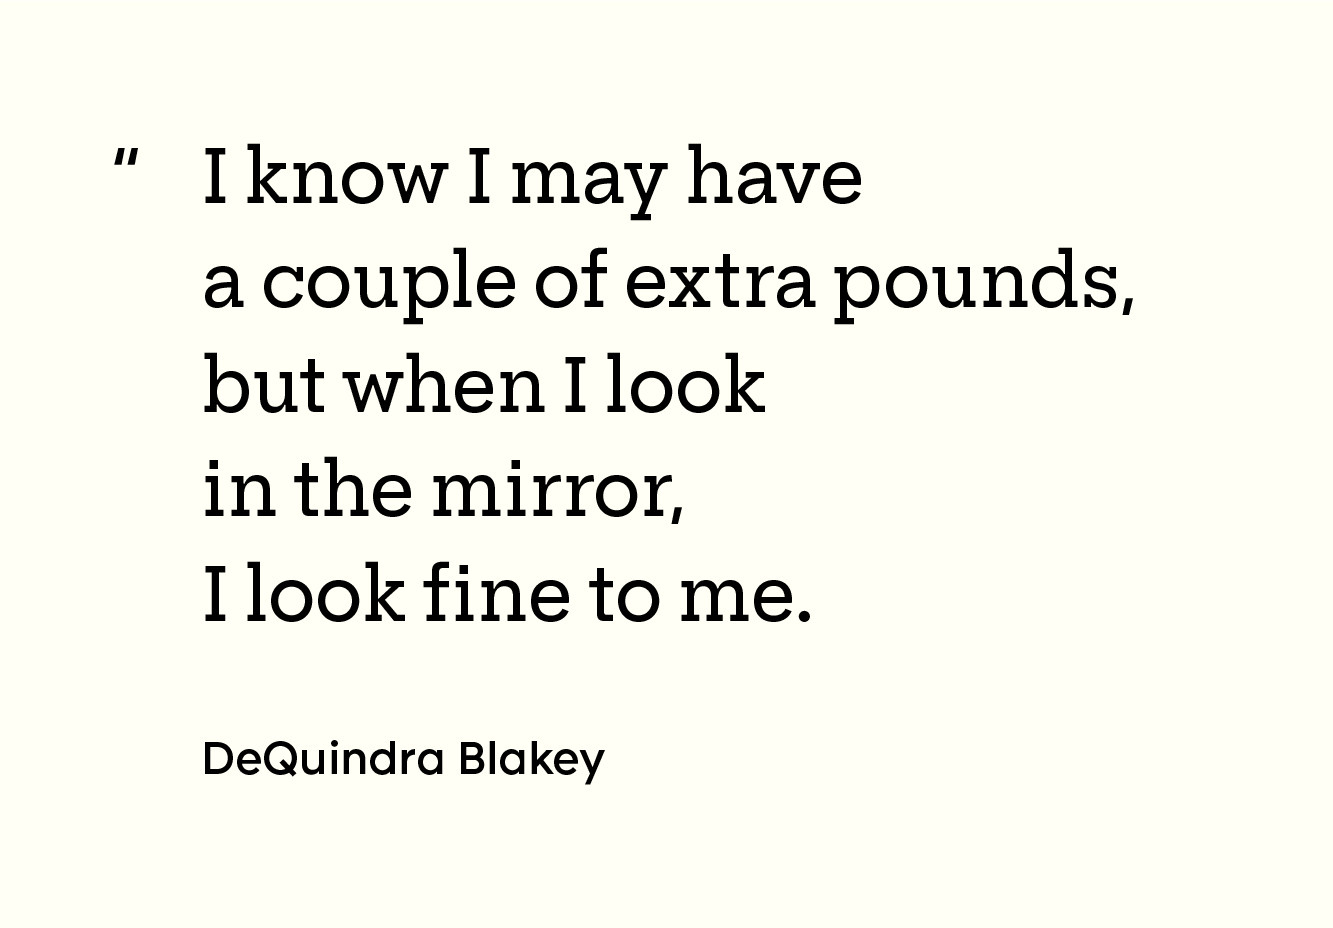 “I know I may have a couple of extra pounds, but when I look in the mirror, I look fine to me. - DeQuindra Blakey”